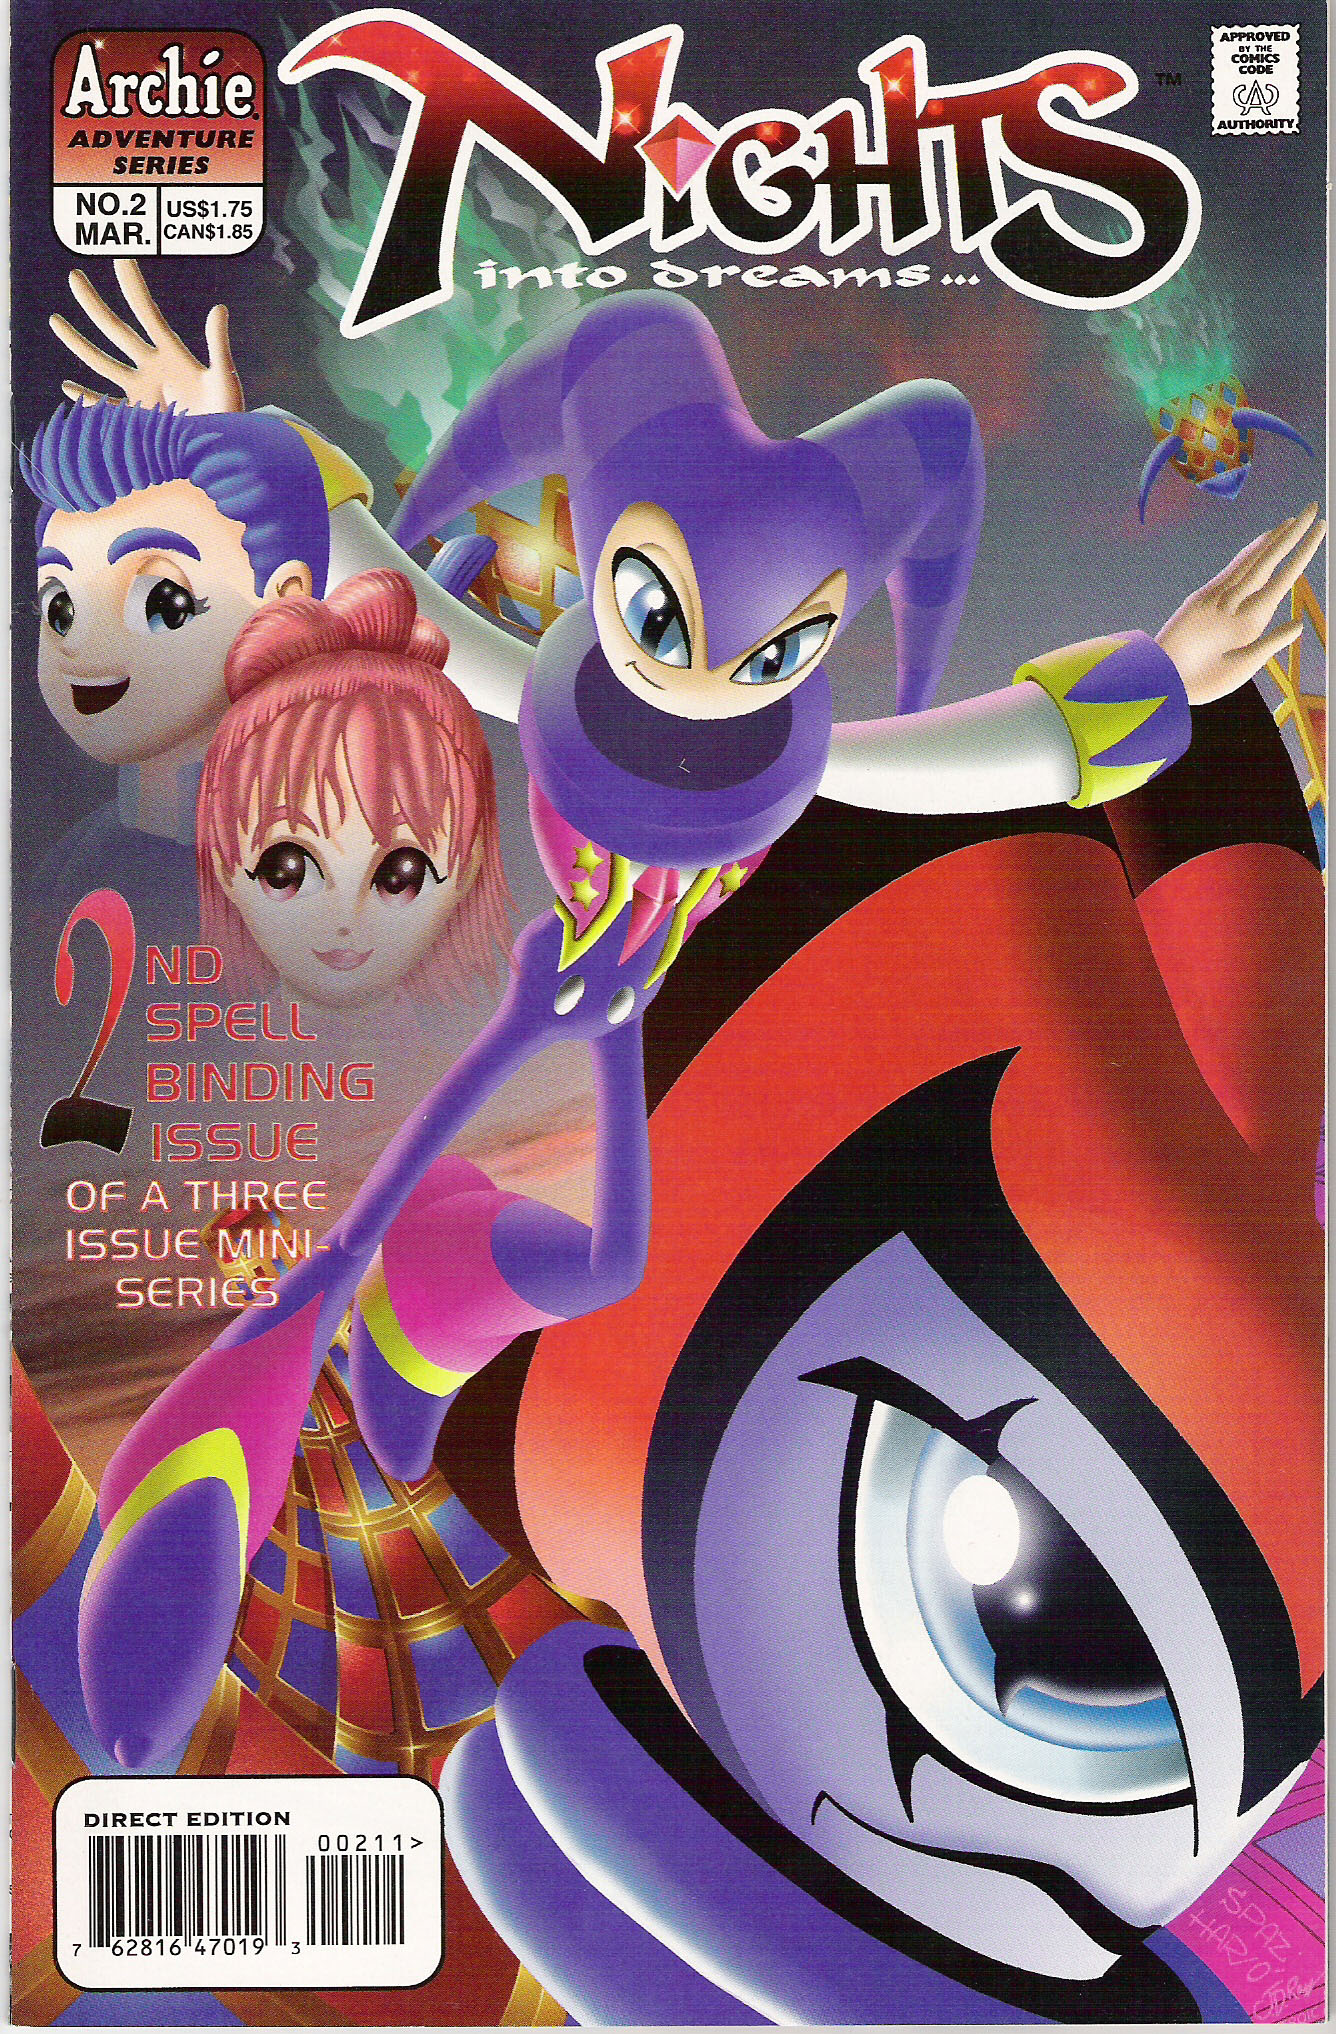 Nights Into Dreams Issue 2 | Read Nights Into Dreams Issue 2 comic online  in high quality. Read Full Comic online for free - Read comics online in  high quality .|viewcomiconline.com